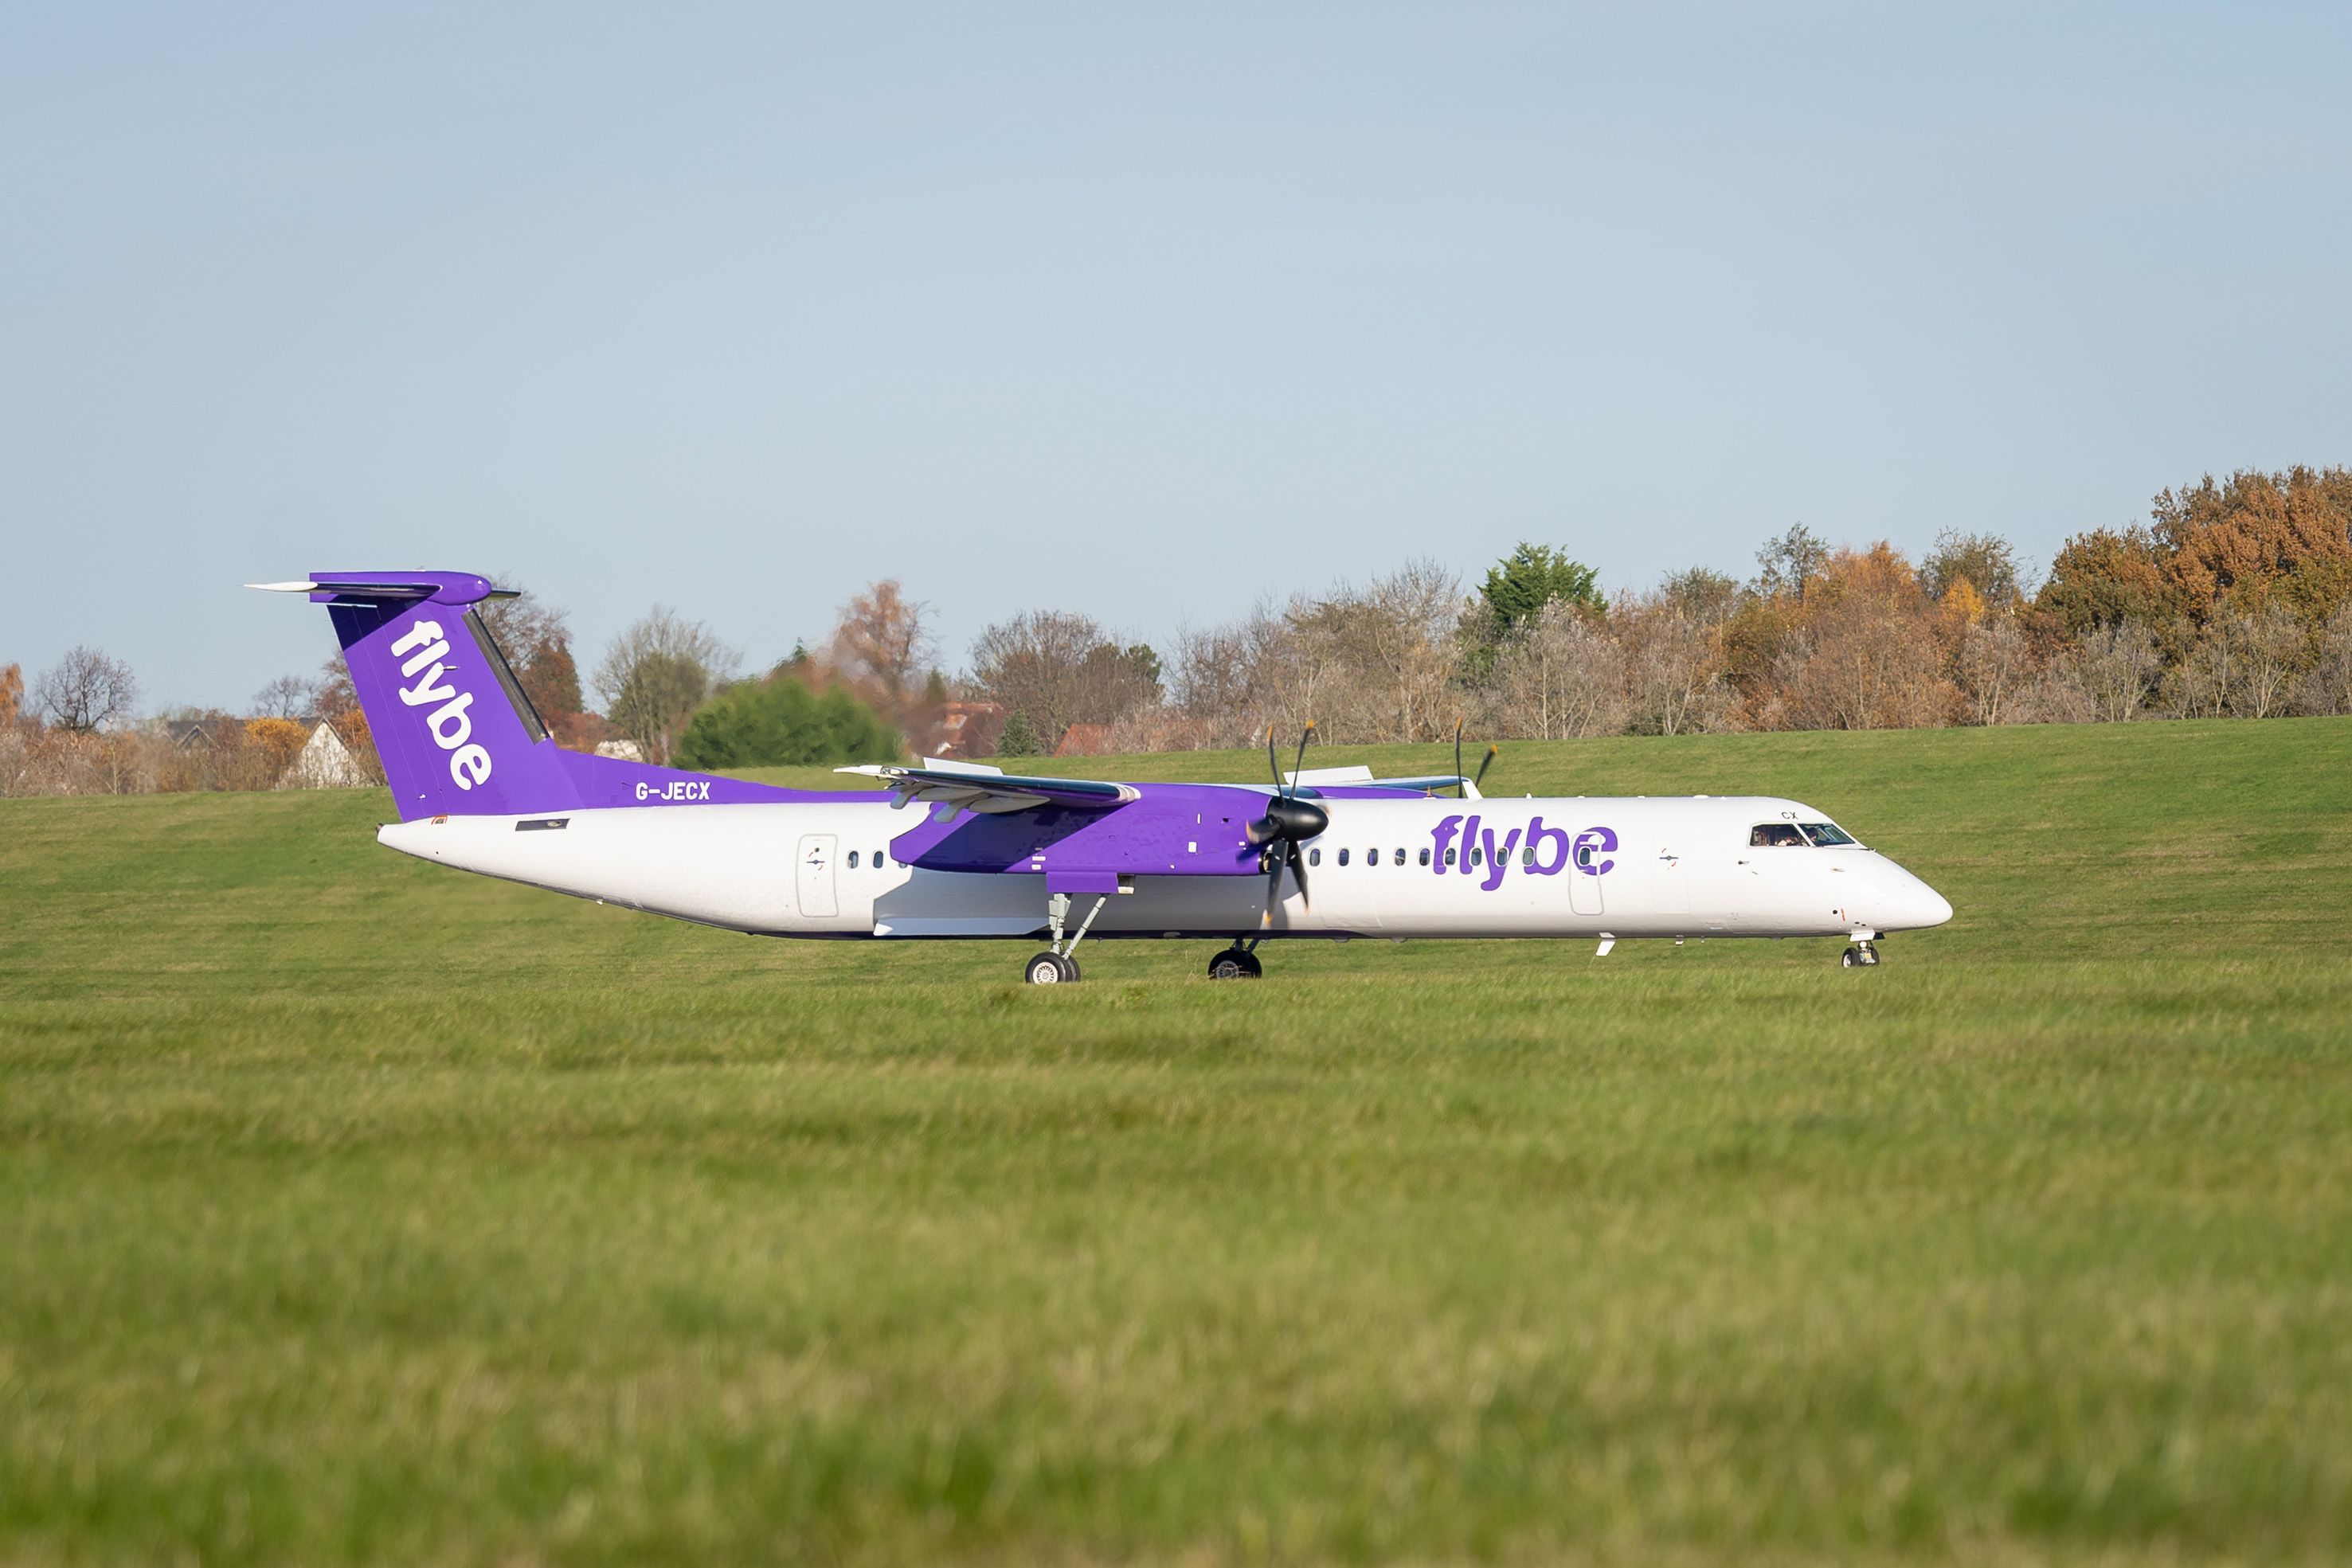 Flybe aircraft on the runway